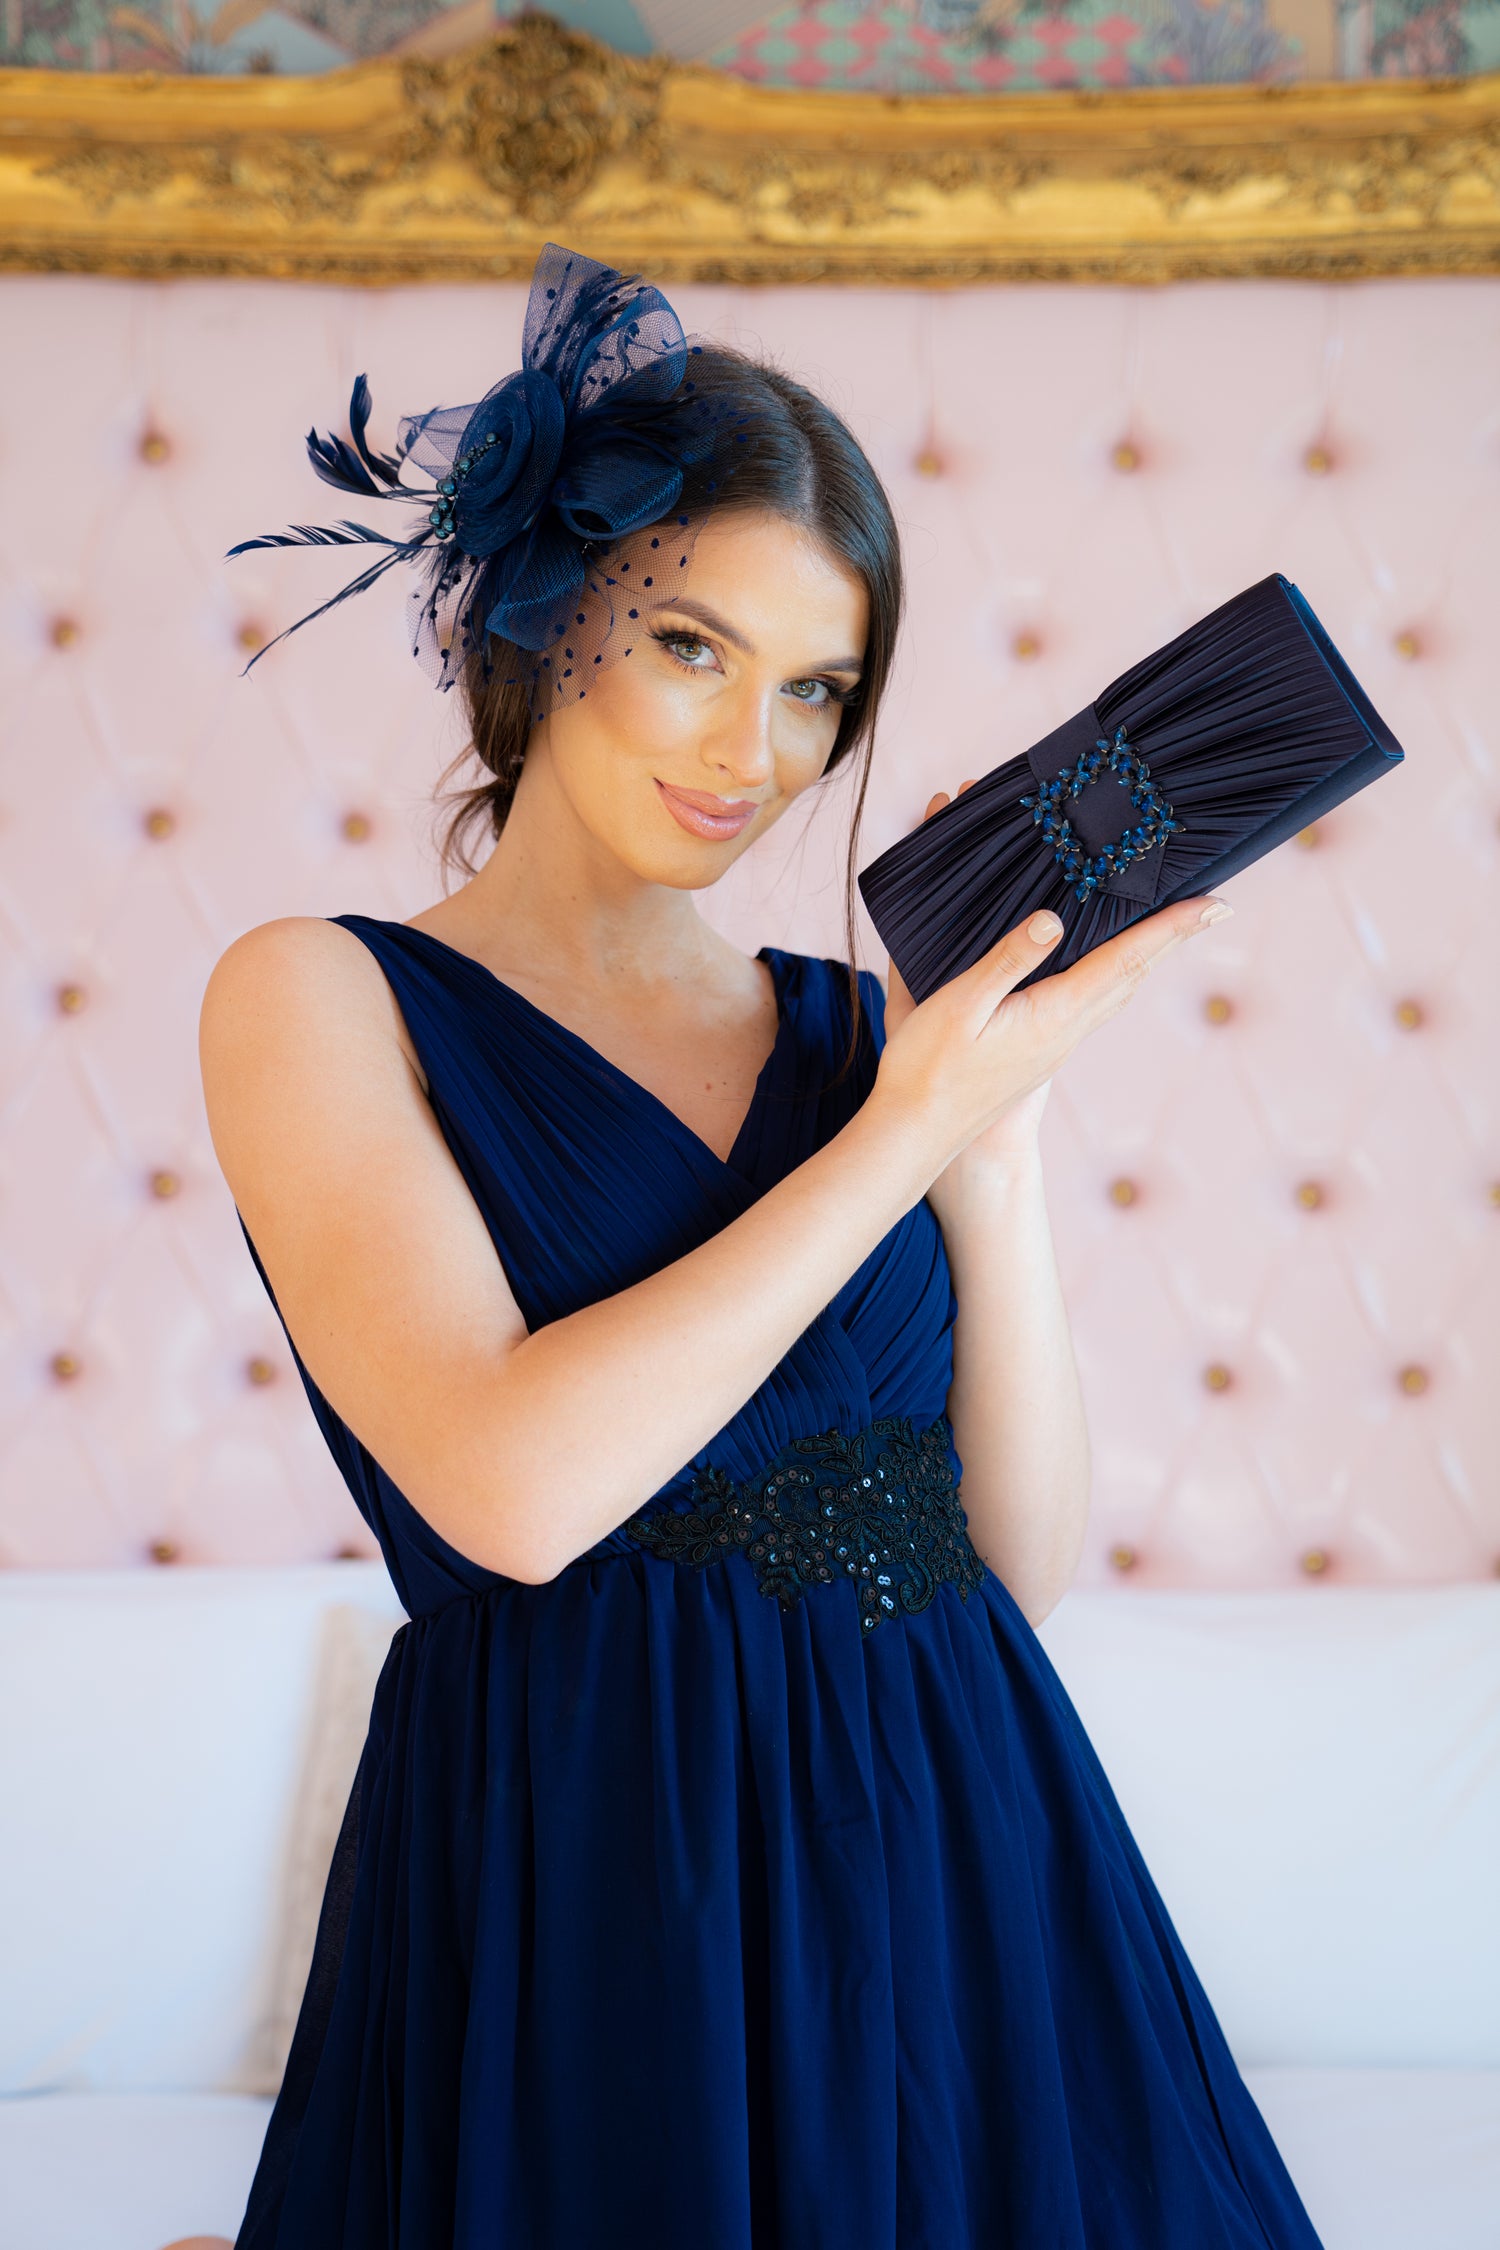 A BEAUTIFUL LADY DRESSED IN BLUE DRESS, BLUE SATIN BAG AND BLUE FASCINATOR